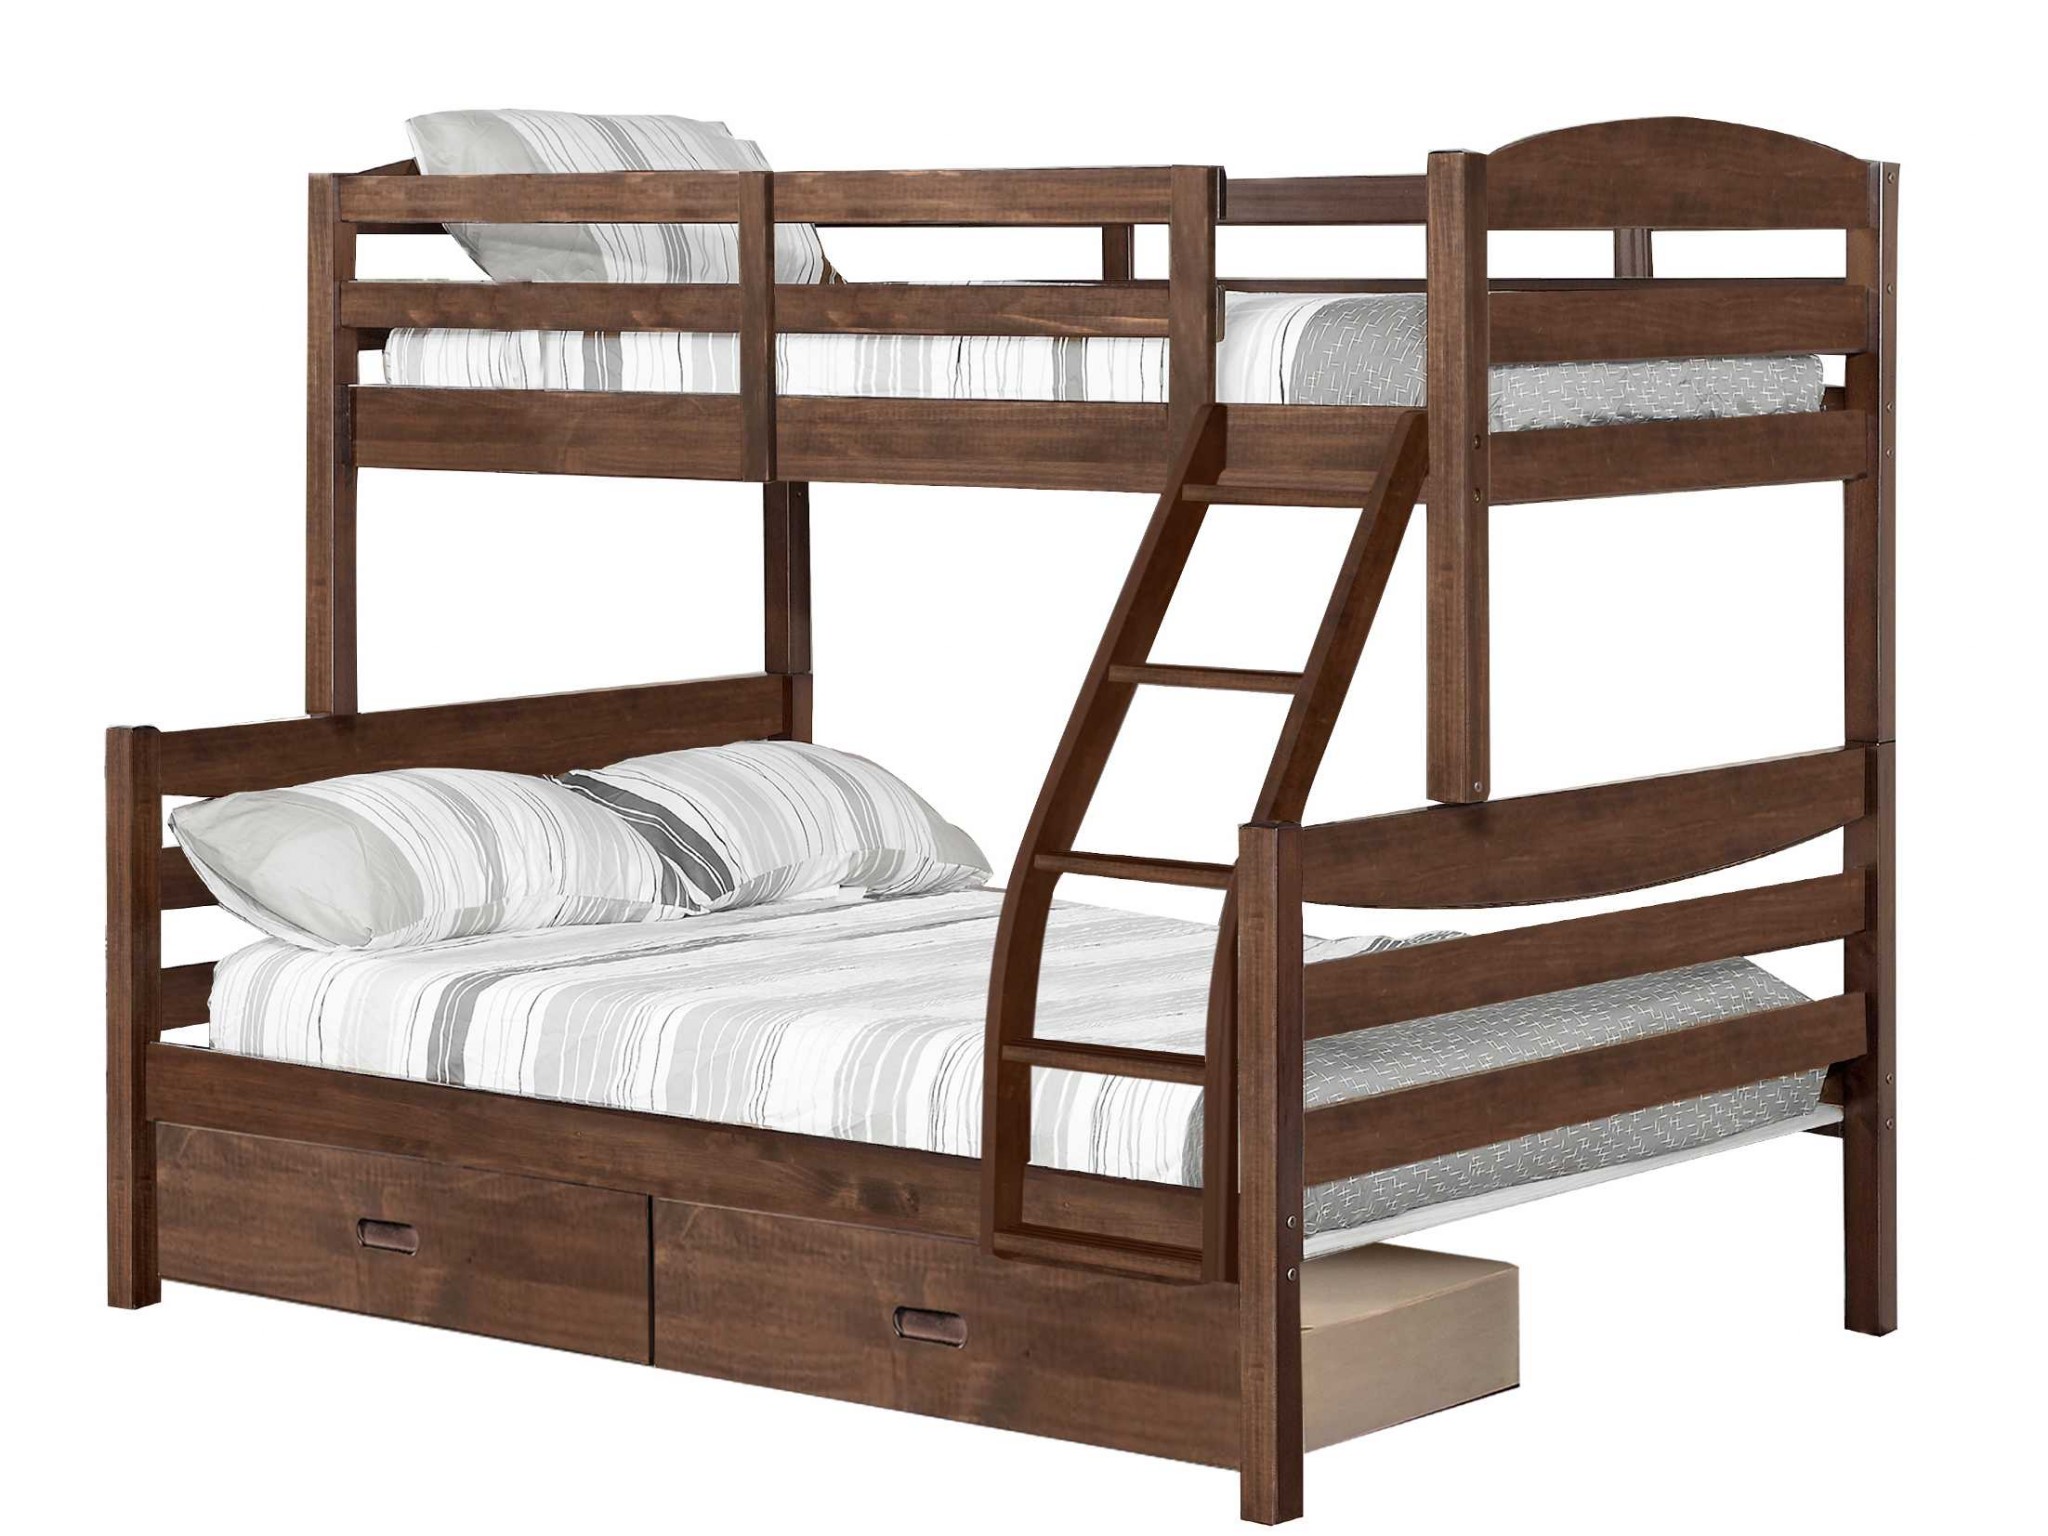 81" X 42.5-57.25" X 66.75" Brown Solid and Manufactured Wood Twin or Full Bunk Bed with 2 Drawers